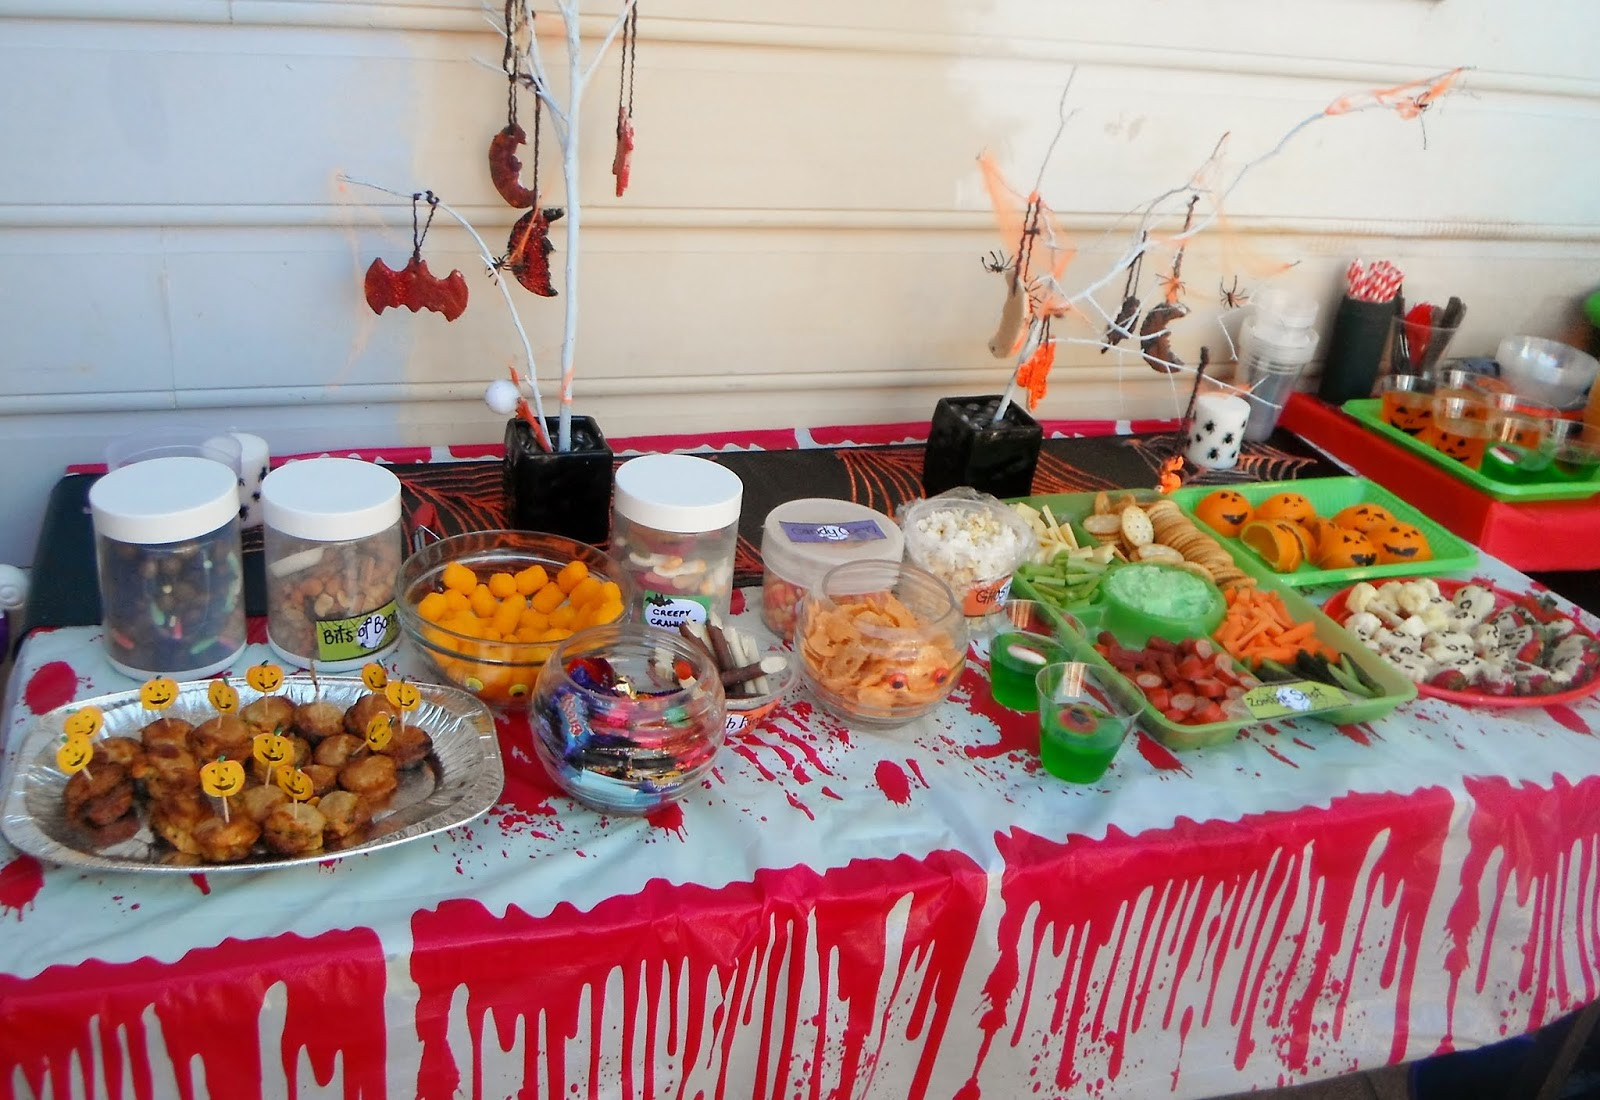 Halloween Food Ideas For Toddlers Party
 Adventures at home with Mum Halloween Party Food